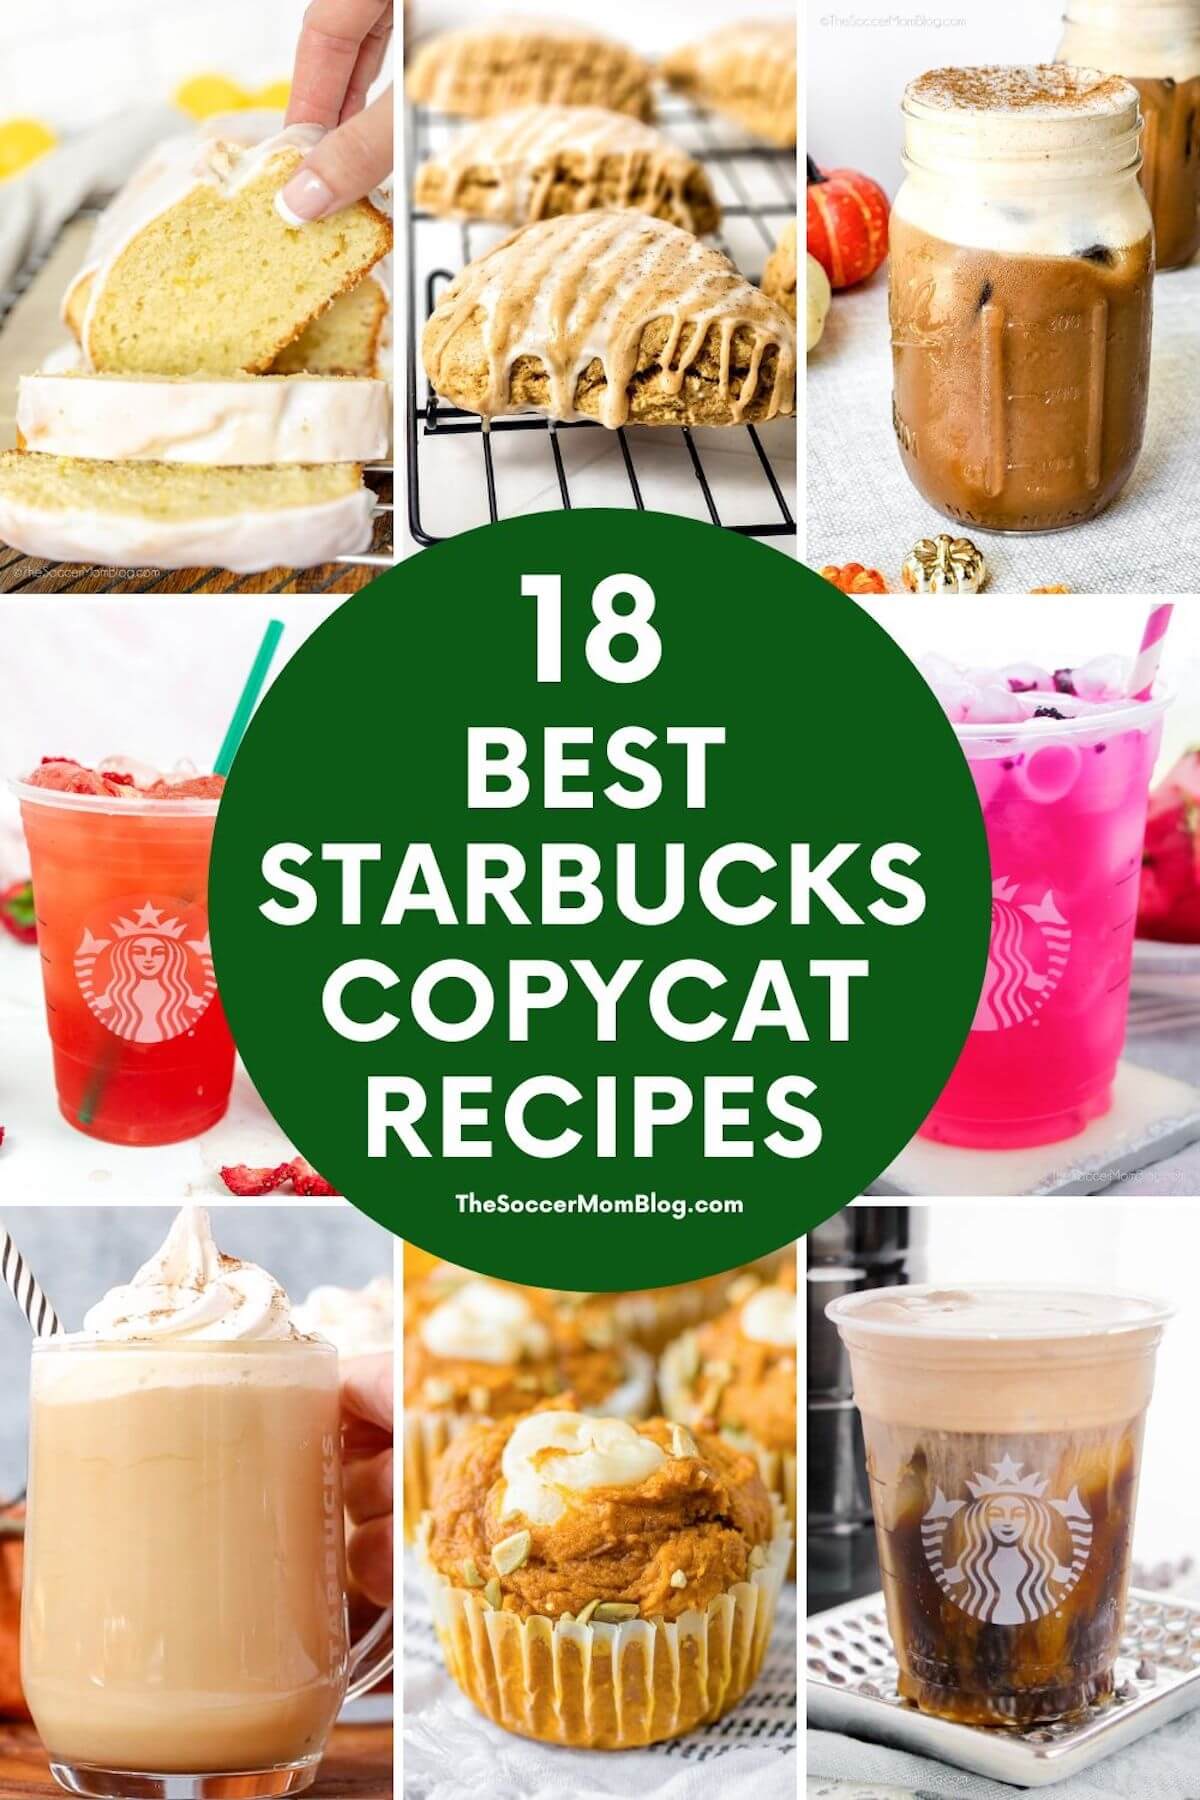 collage of drinks and baked goods; text overlay "18 Best Starbucks Copycat Recipes"